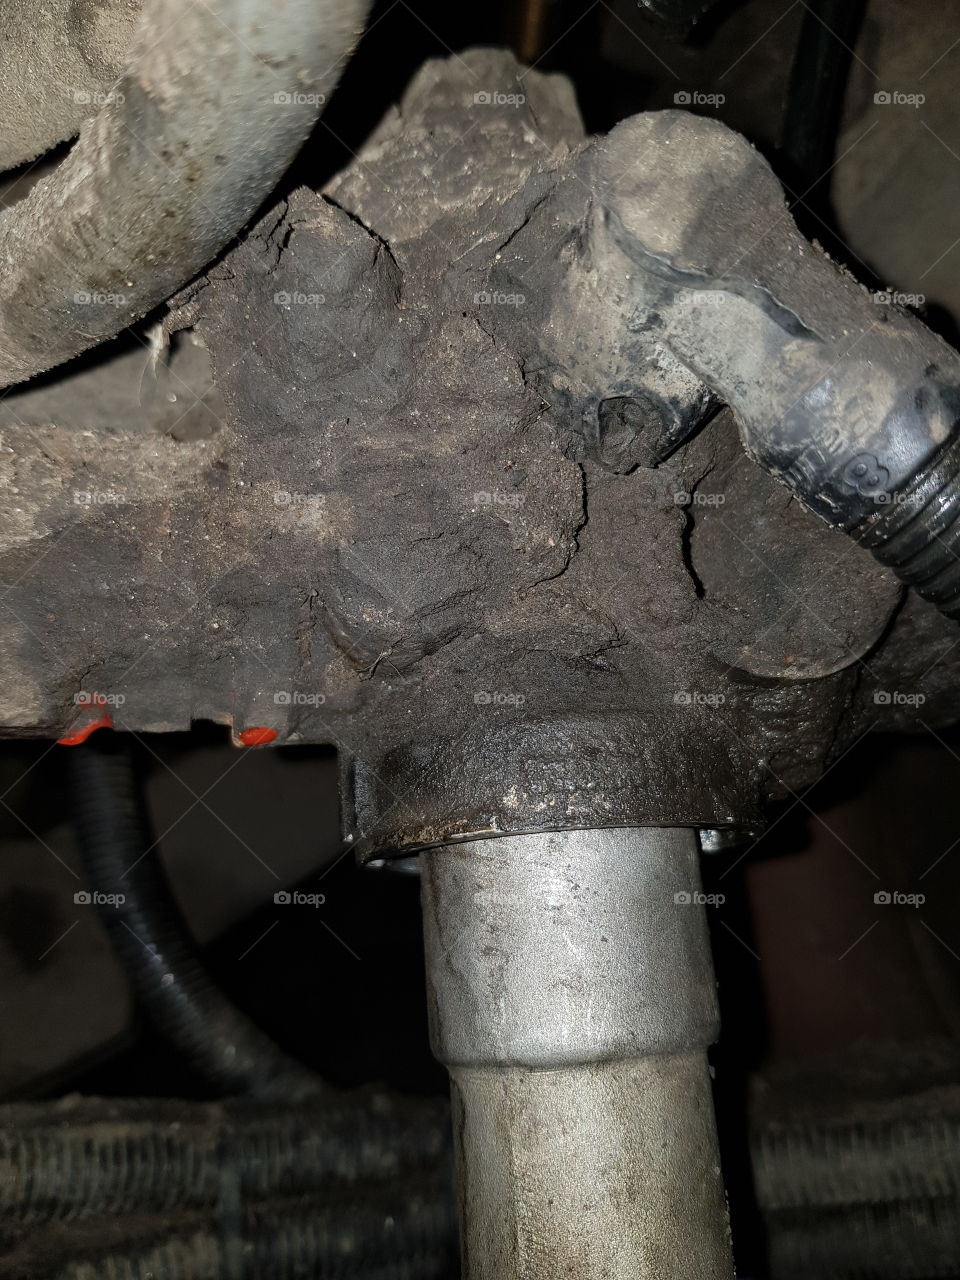 leaking exhaust valve air system